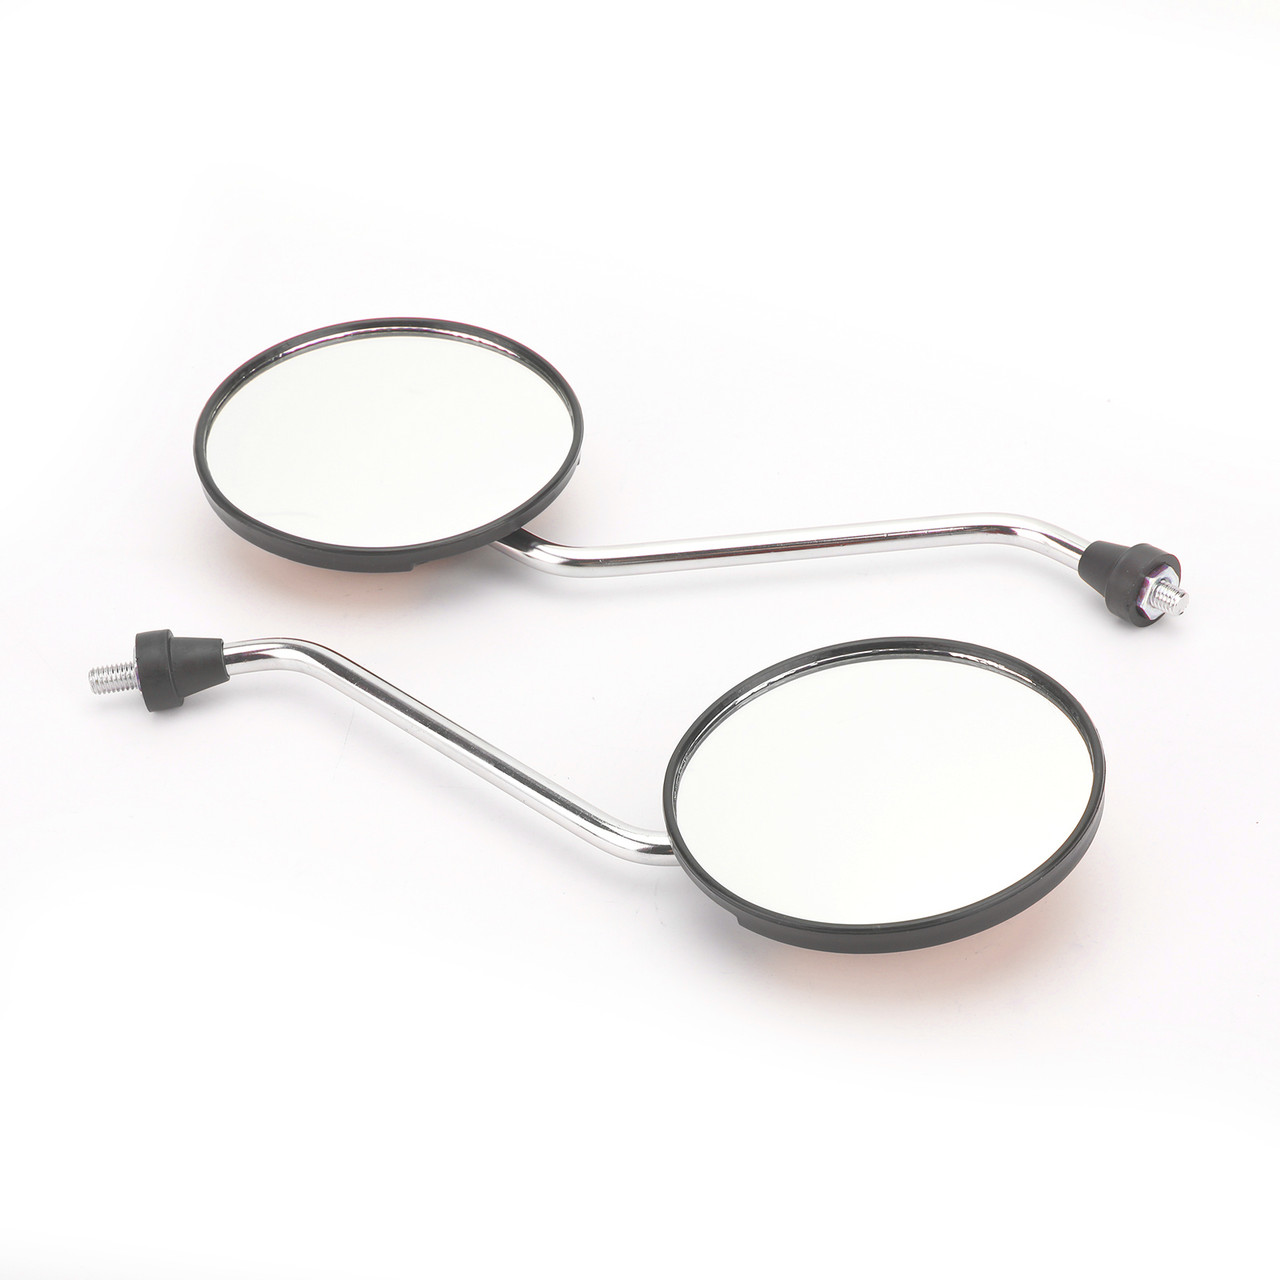 Pair 8mm Rearview Mirrors fits For Kawasaki Scooter Motorcycle Moped Bike ATV with 8MM threads Red~BC3